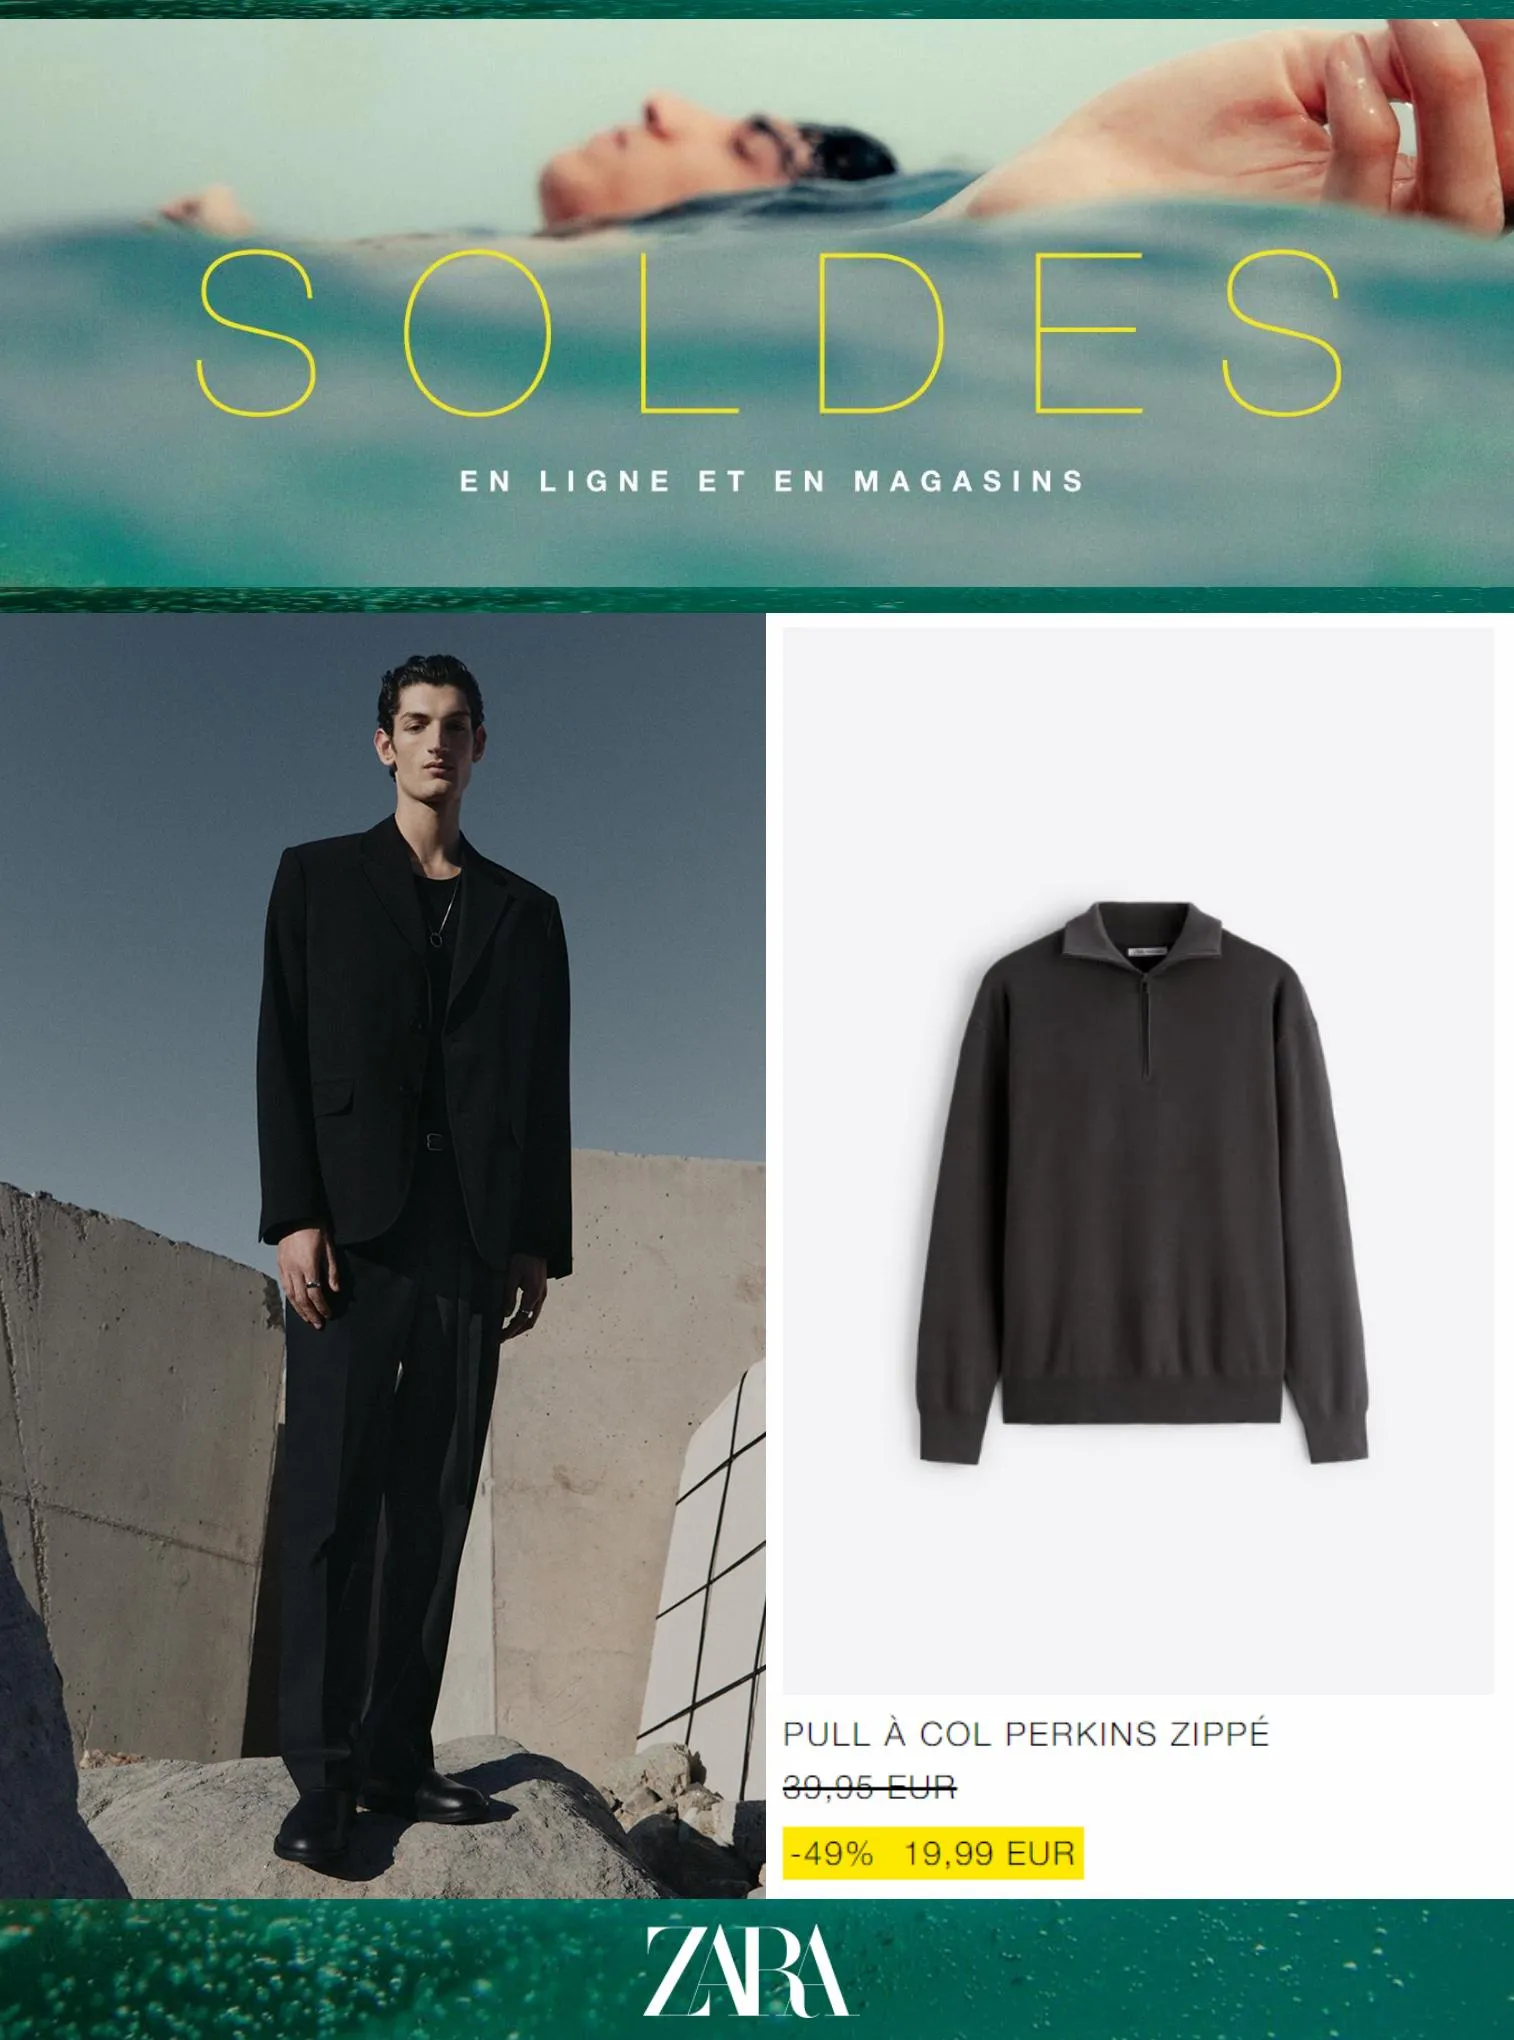 Catalogue Soldes | Homme, page 00001